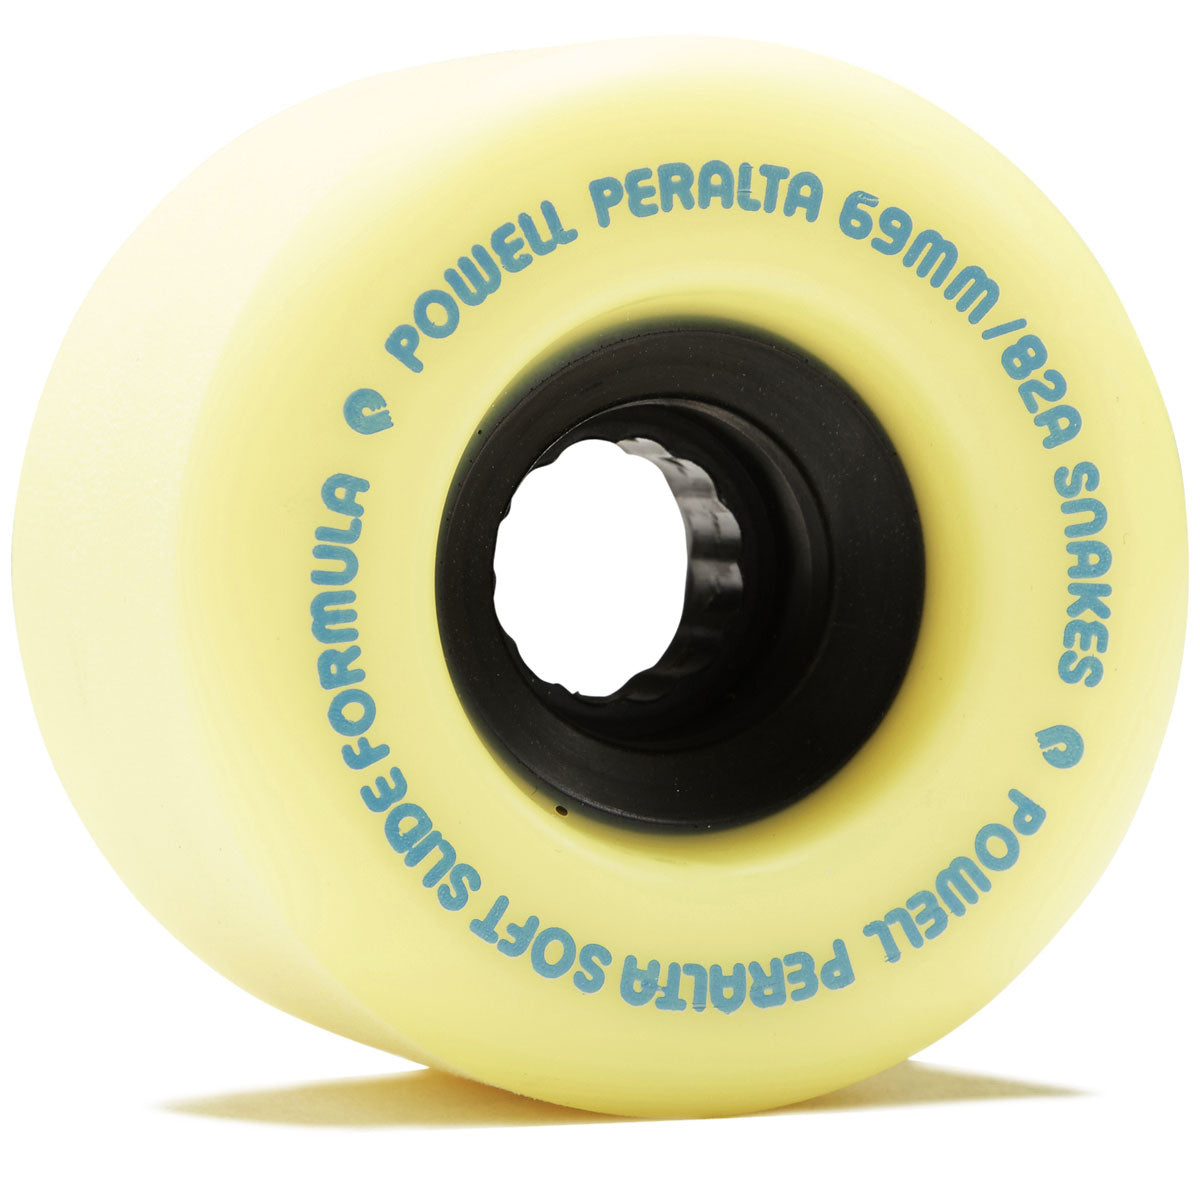 Powell-Peralta Snakes 82A Longboard Wheels - Yellow - 69mm image 1